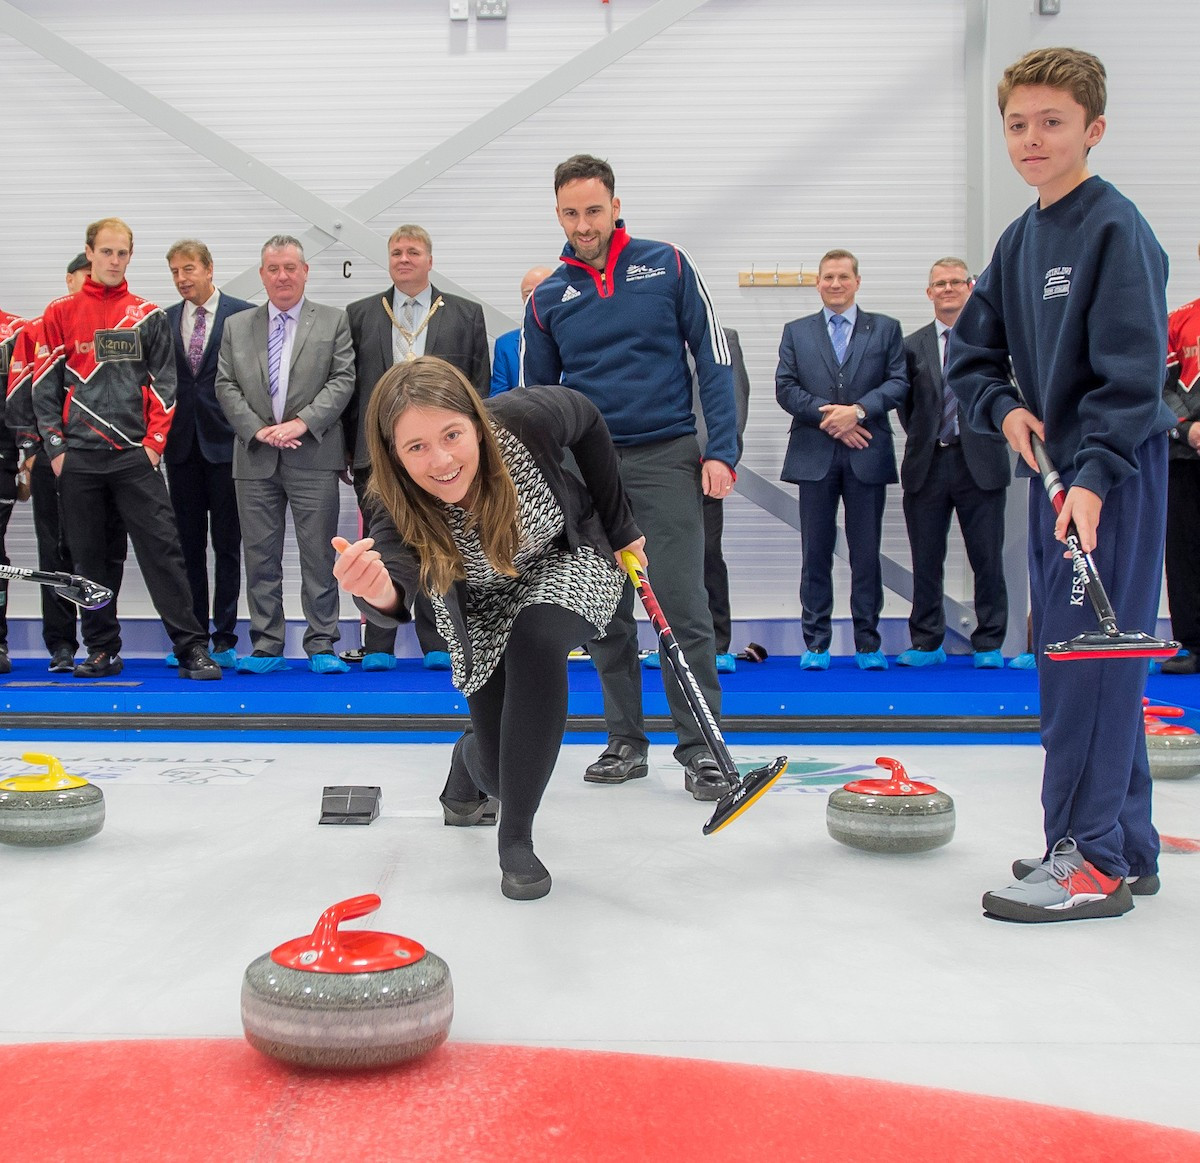 National Curling Academy opens in Scotland